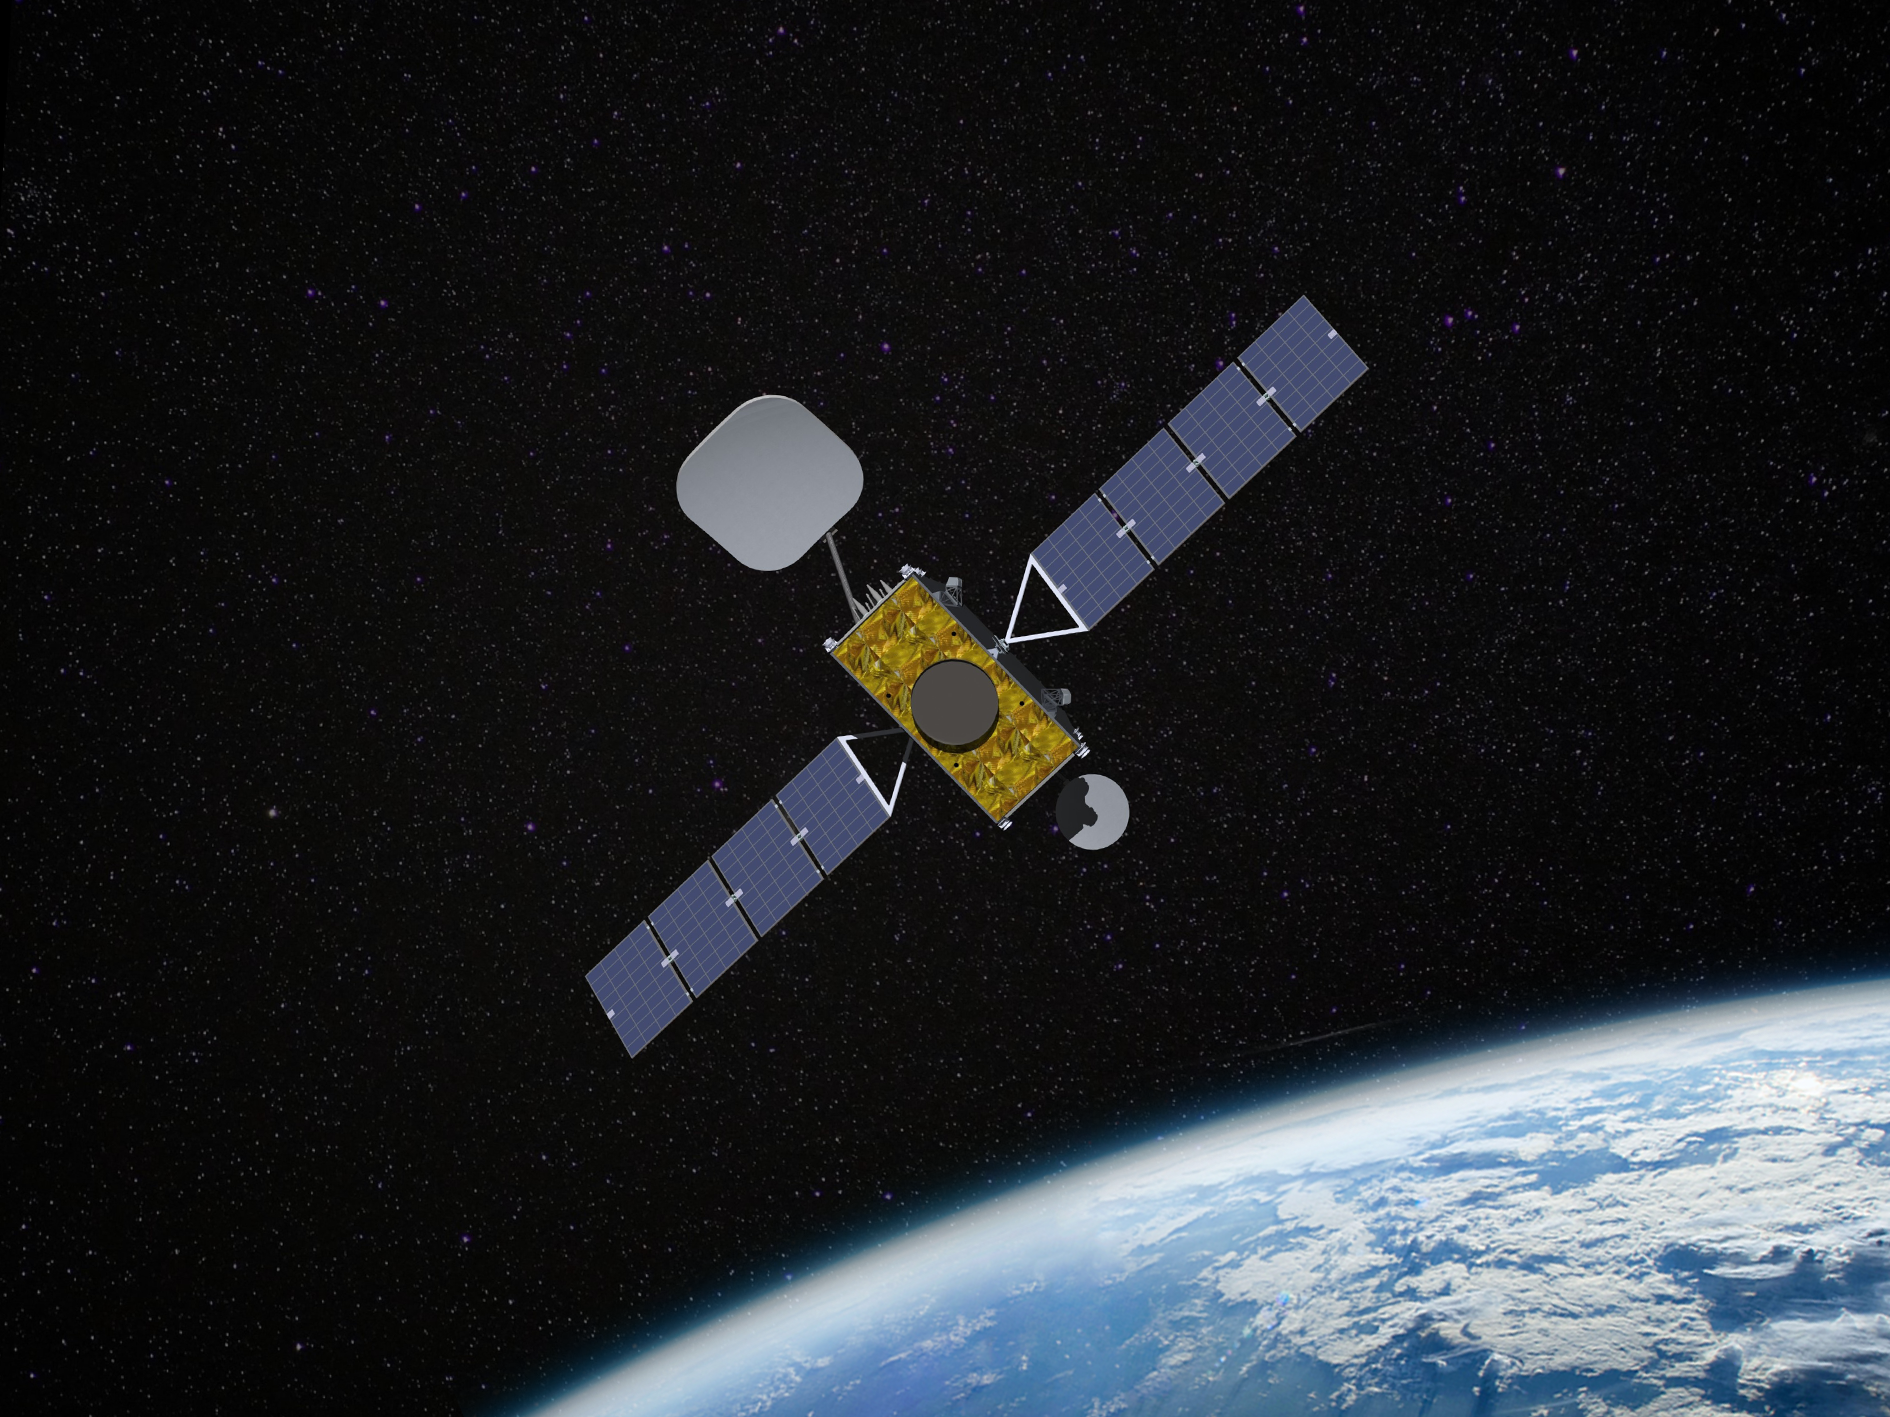 SWISSto12 Secures CHF 25 Million (€26.15million) Working Capital Financing Facility from UBS for HummingSat Satellite Business